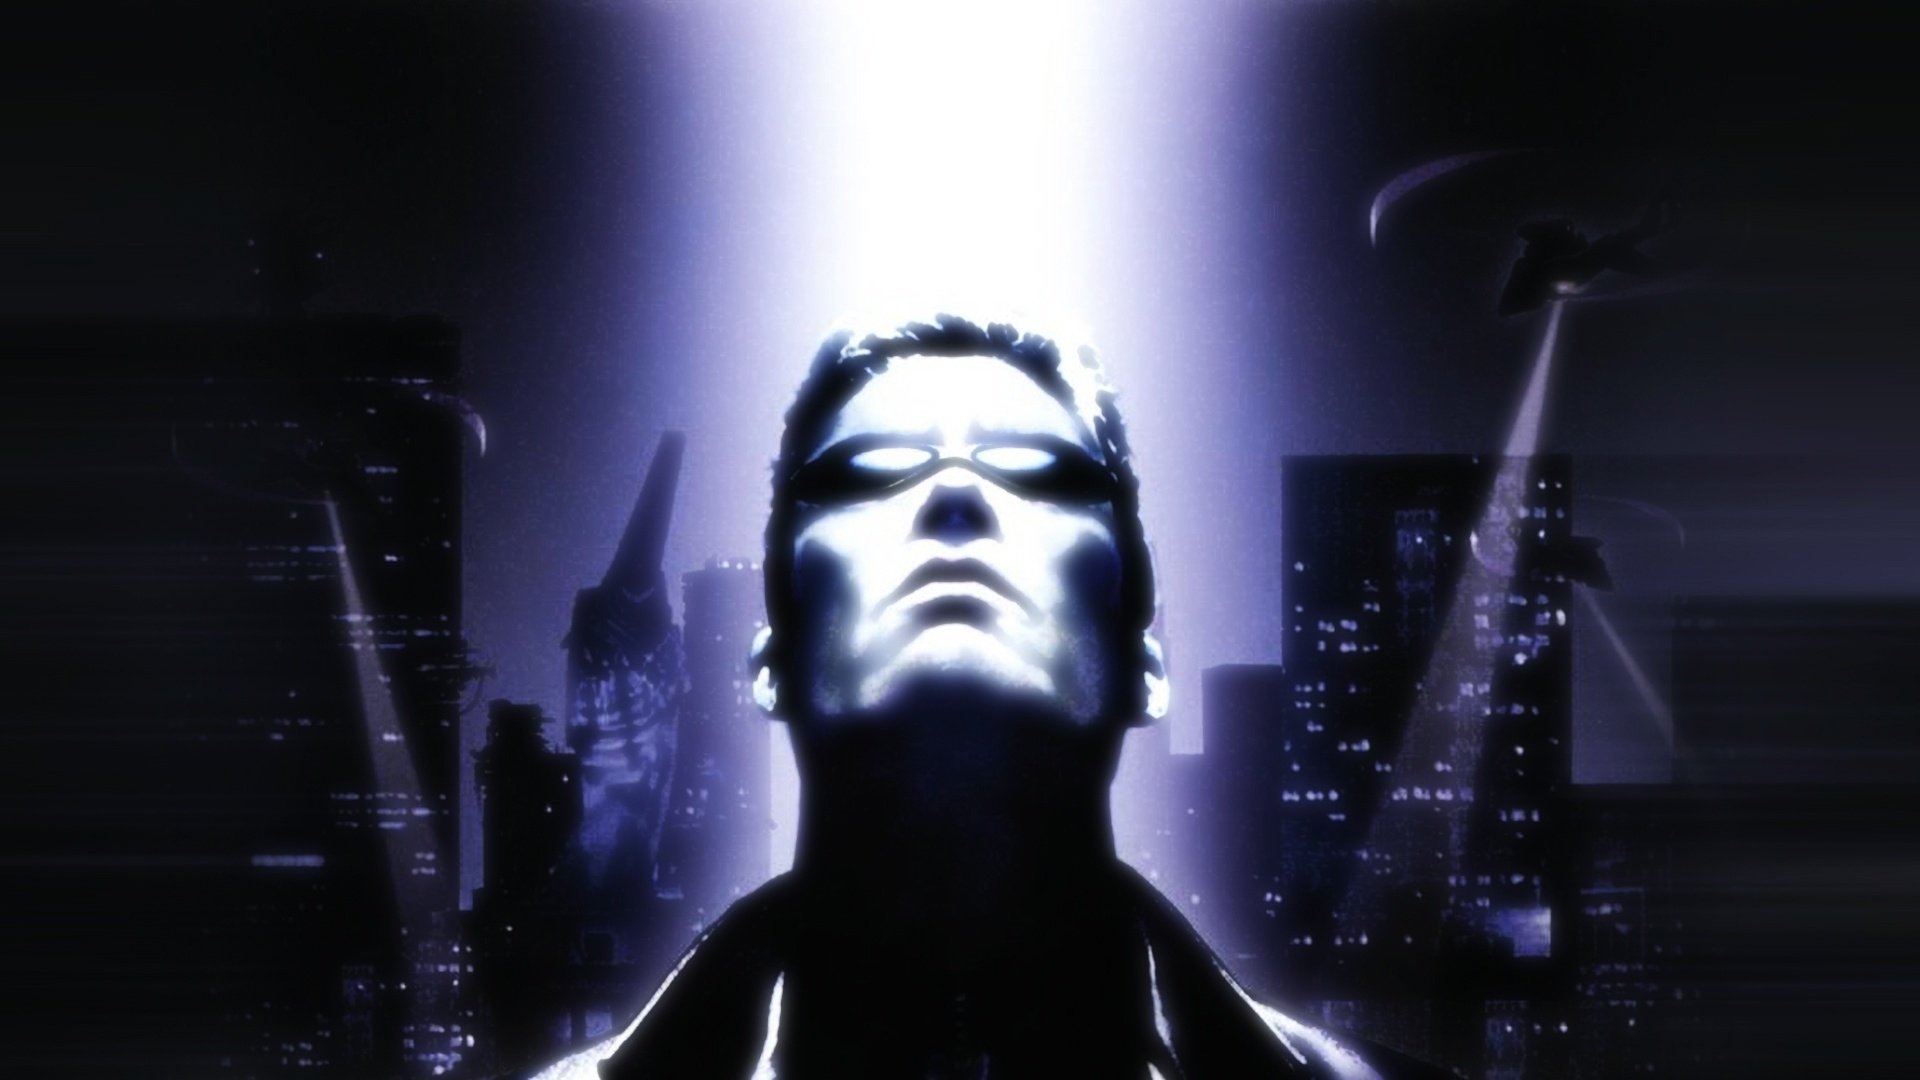 One of the best Deus Ex mods just received a total overhaul after 14 years